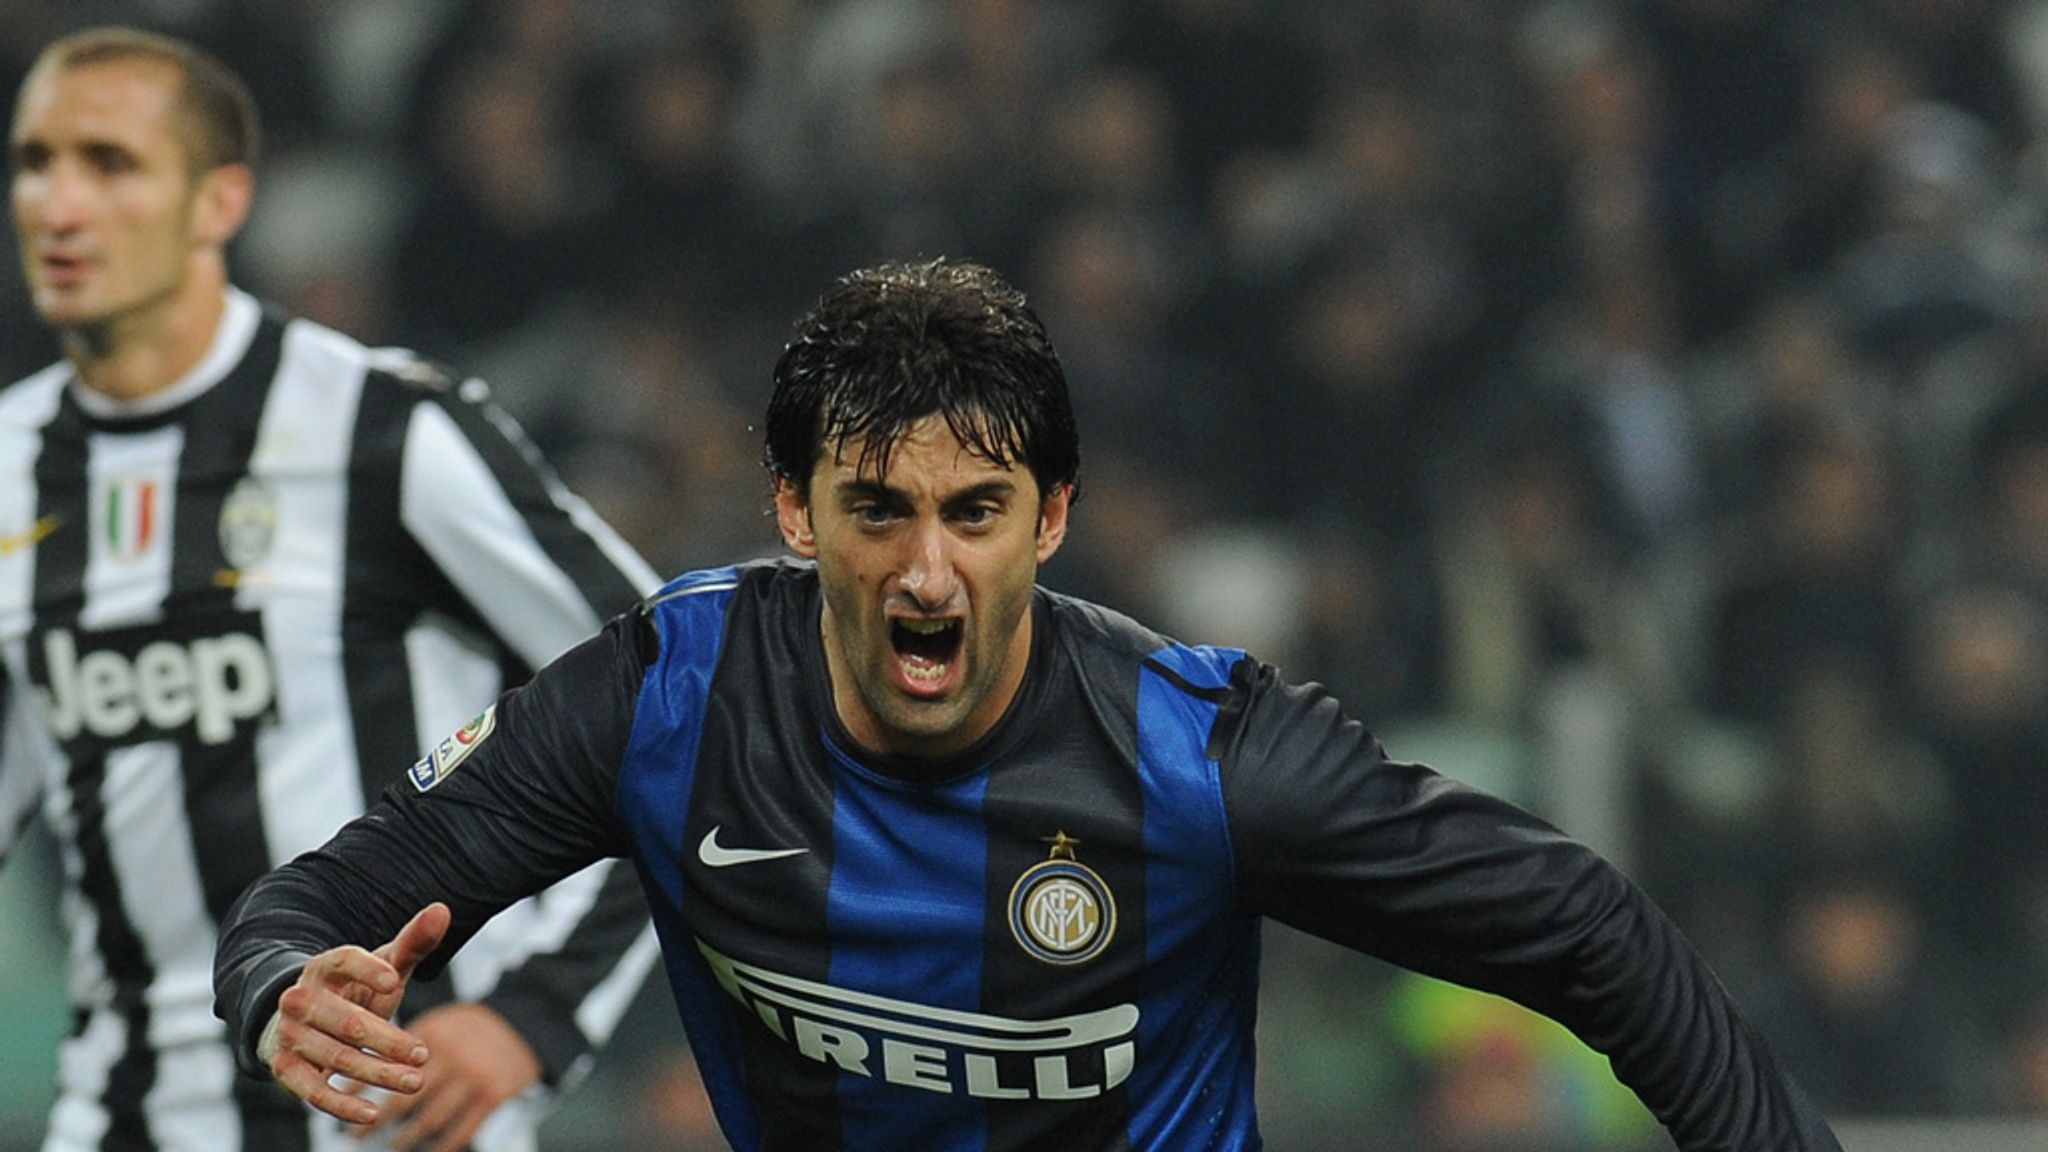 The first team to violate the Juventus Allianz Stadium was Inter, who on November 3, 2012 defeated the Bianconeri at home for the first time after 49 games